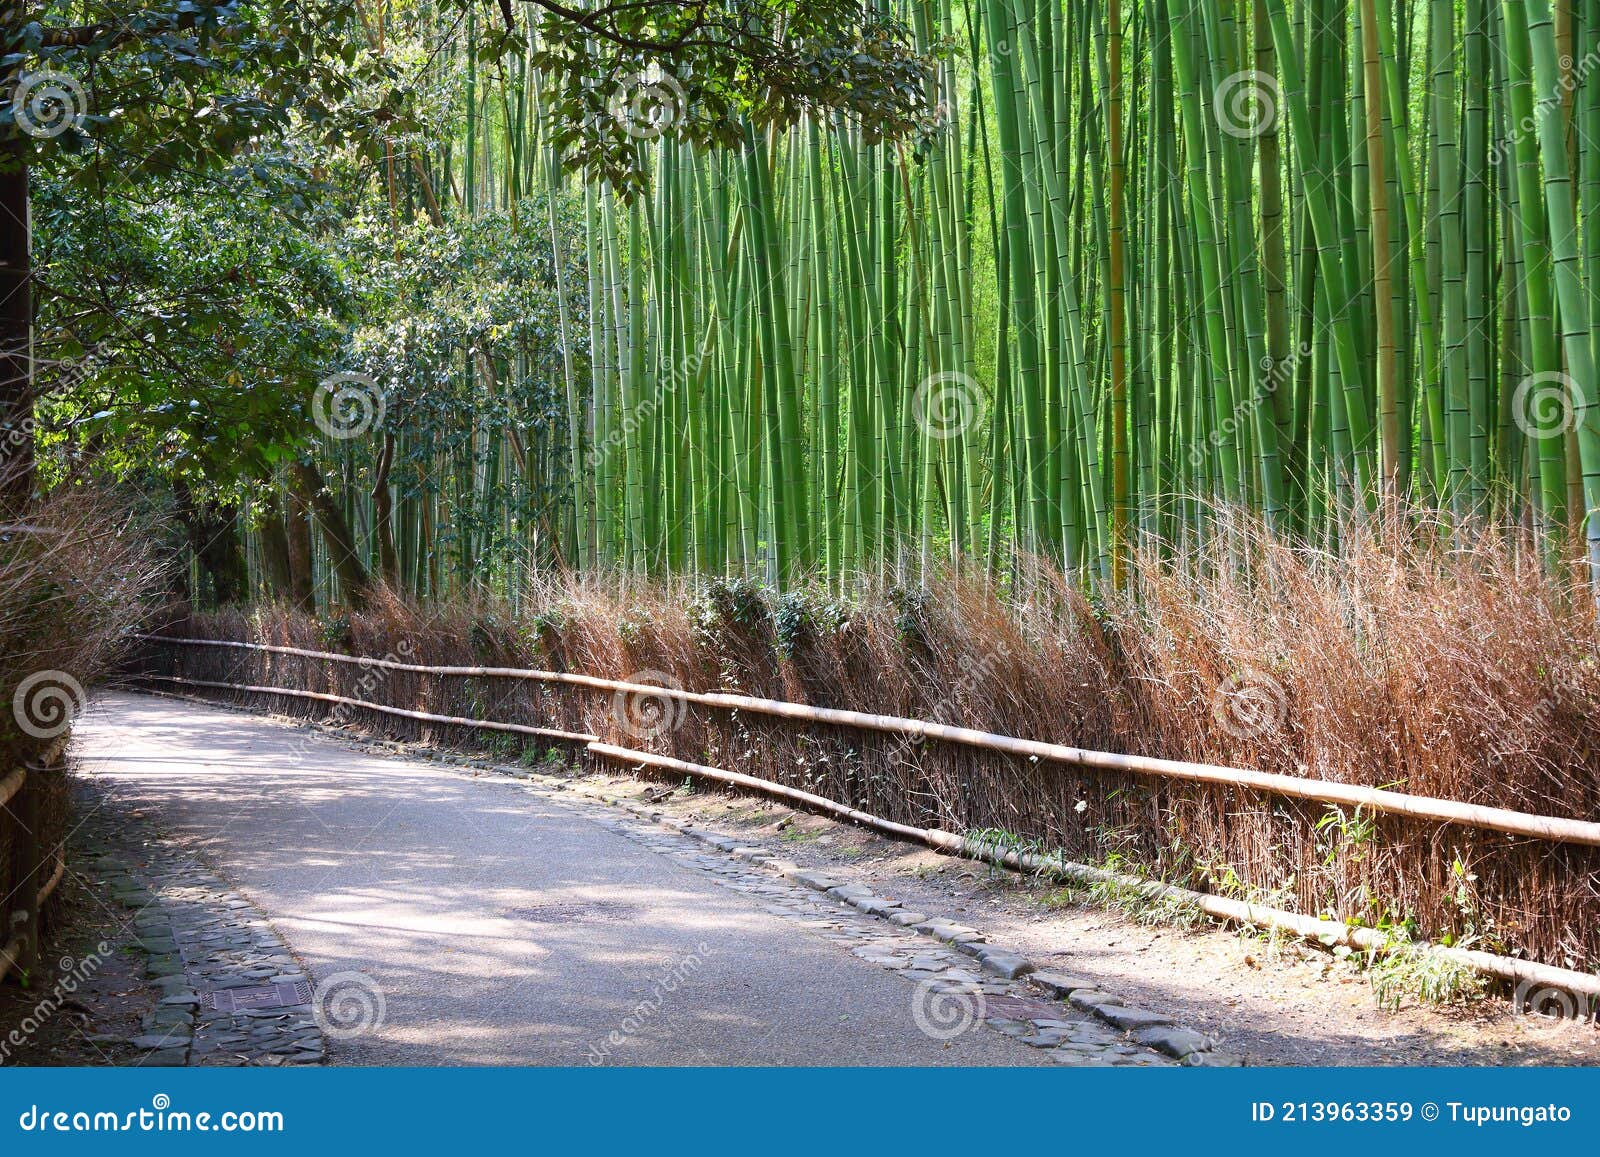 sagano bamboo forest in kyoto